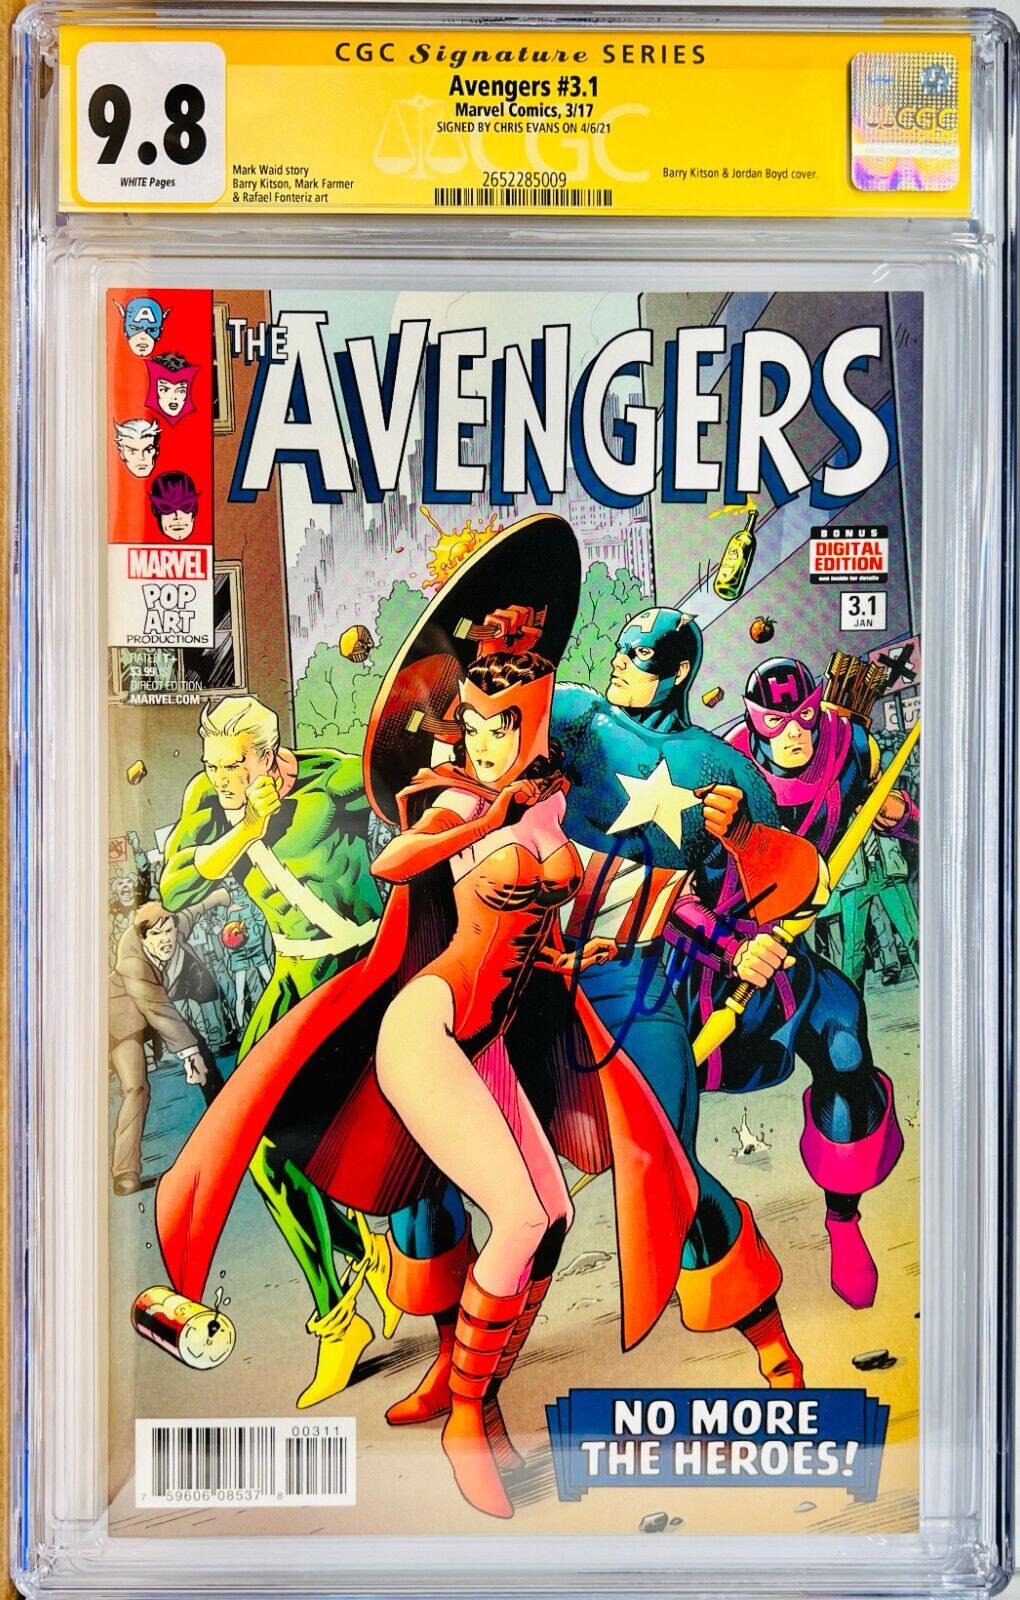 CGC Signature Series Graded 9.8 The Avengers #3.1 Signed by Chris Evans